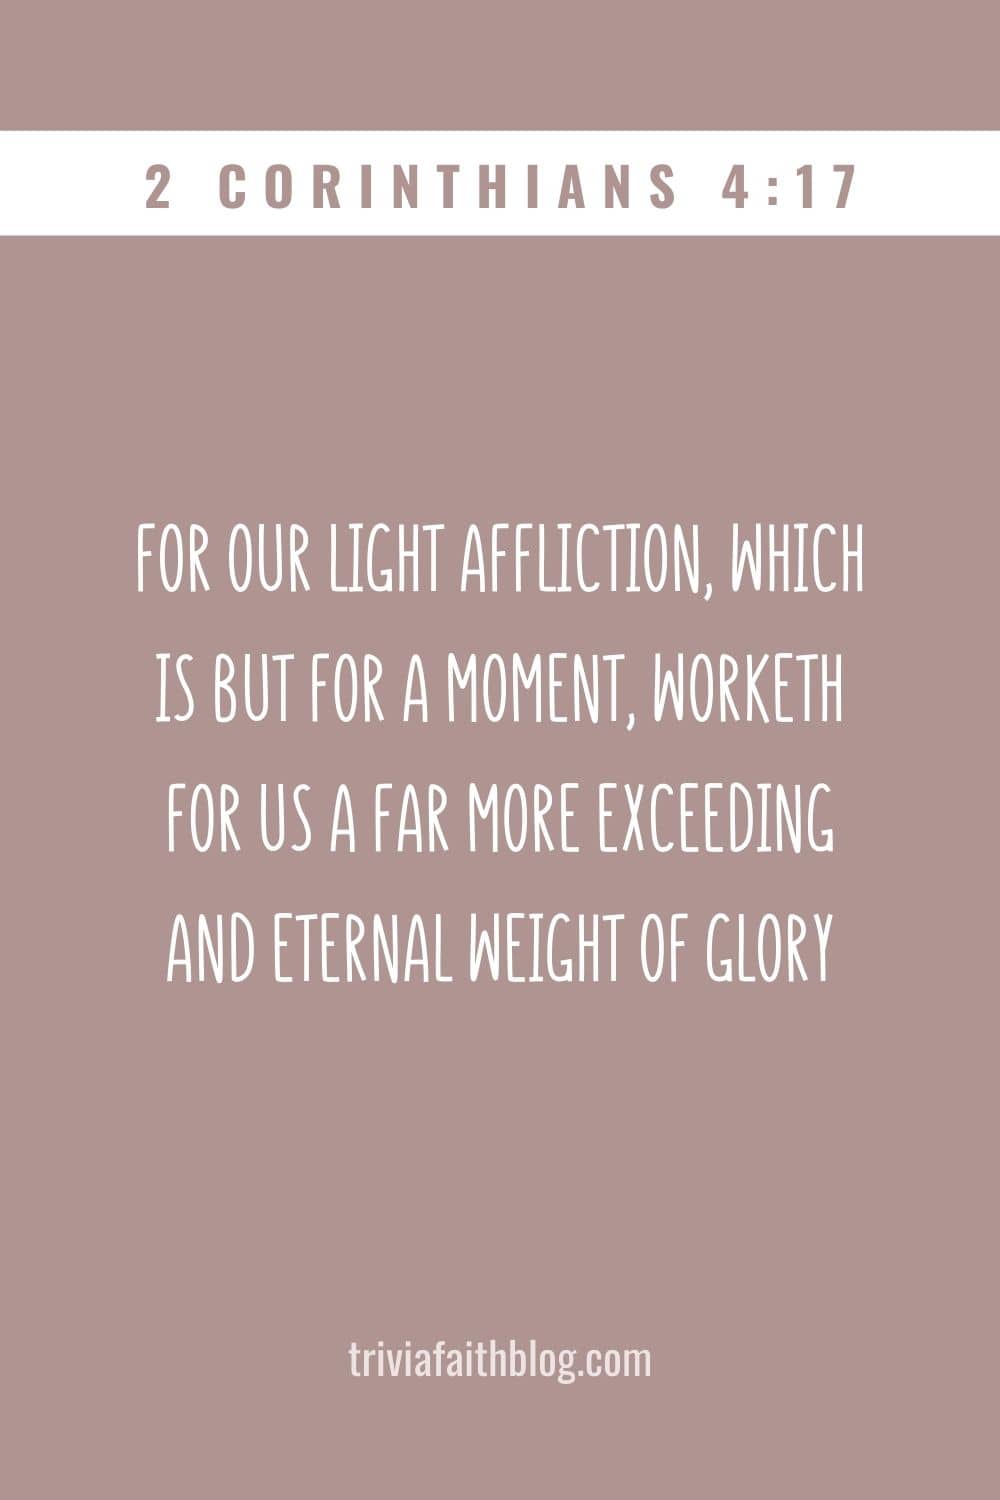 For our light affliction, which is but for a moment, worketh for us a far more exceeding and eternal weight of glory